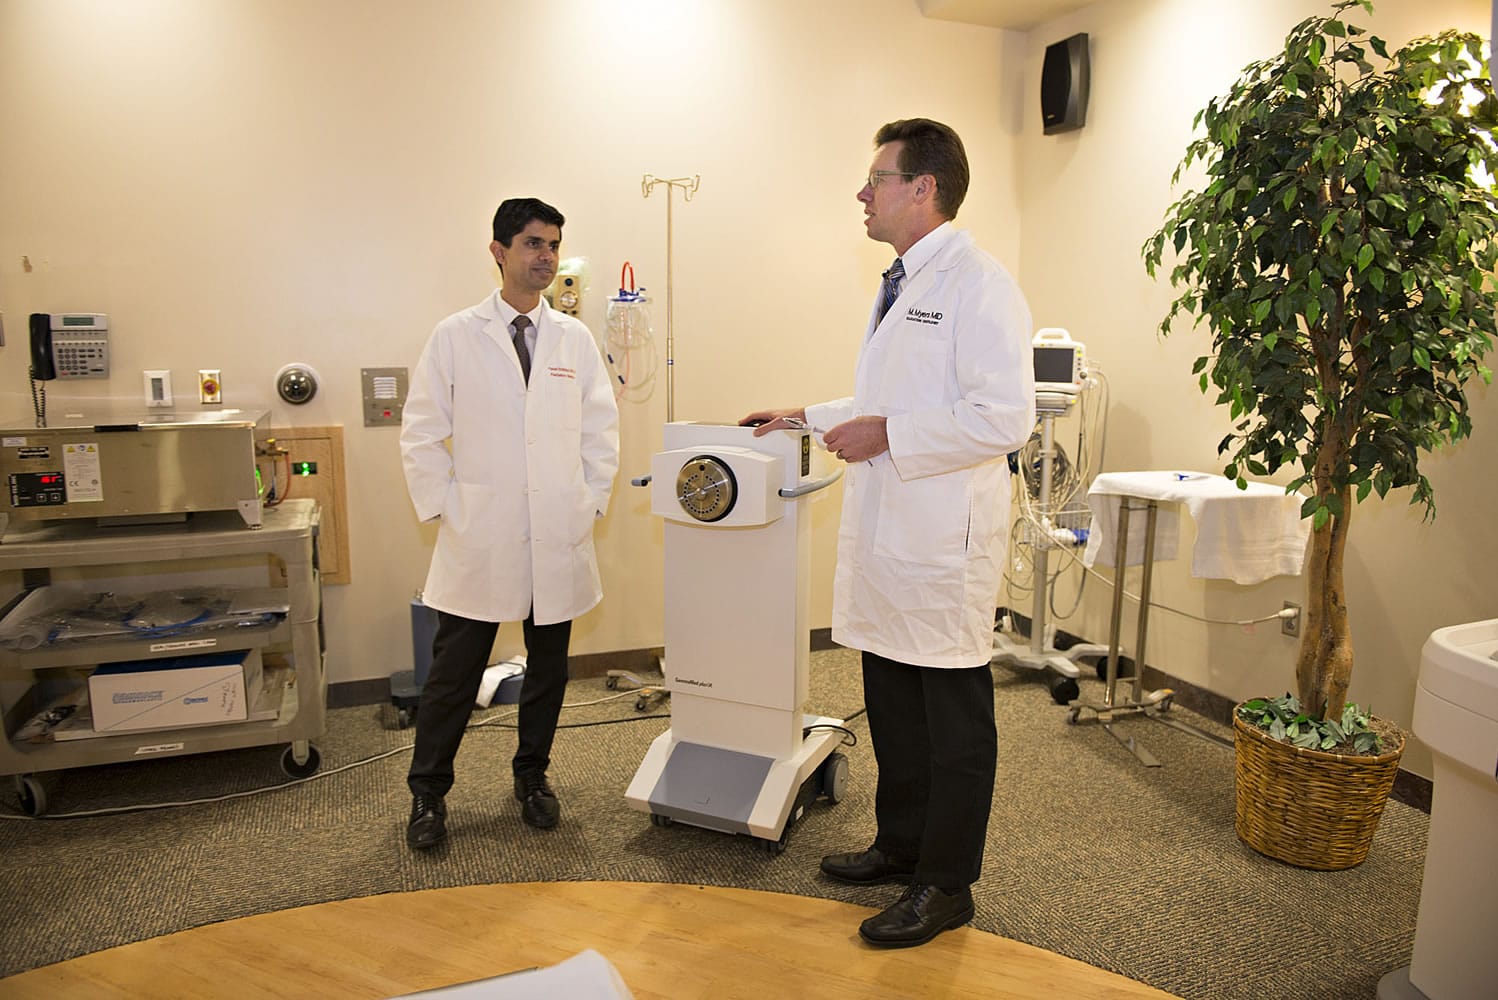 Drs. Faisal Siddiqui, left, and Michael Myers discuss a radiation dose plan for a patient while standing near the machine that delivers radiation to patients undergoing breast brachytherapy. Breast brachytherapy delivers radiation through a device placed in the cavity left in a woman's breast after a lumpectomy.